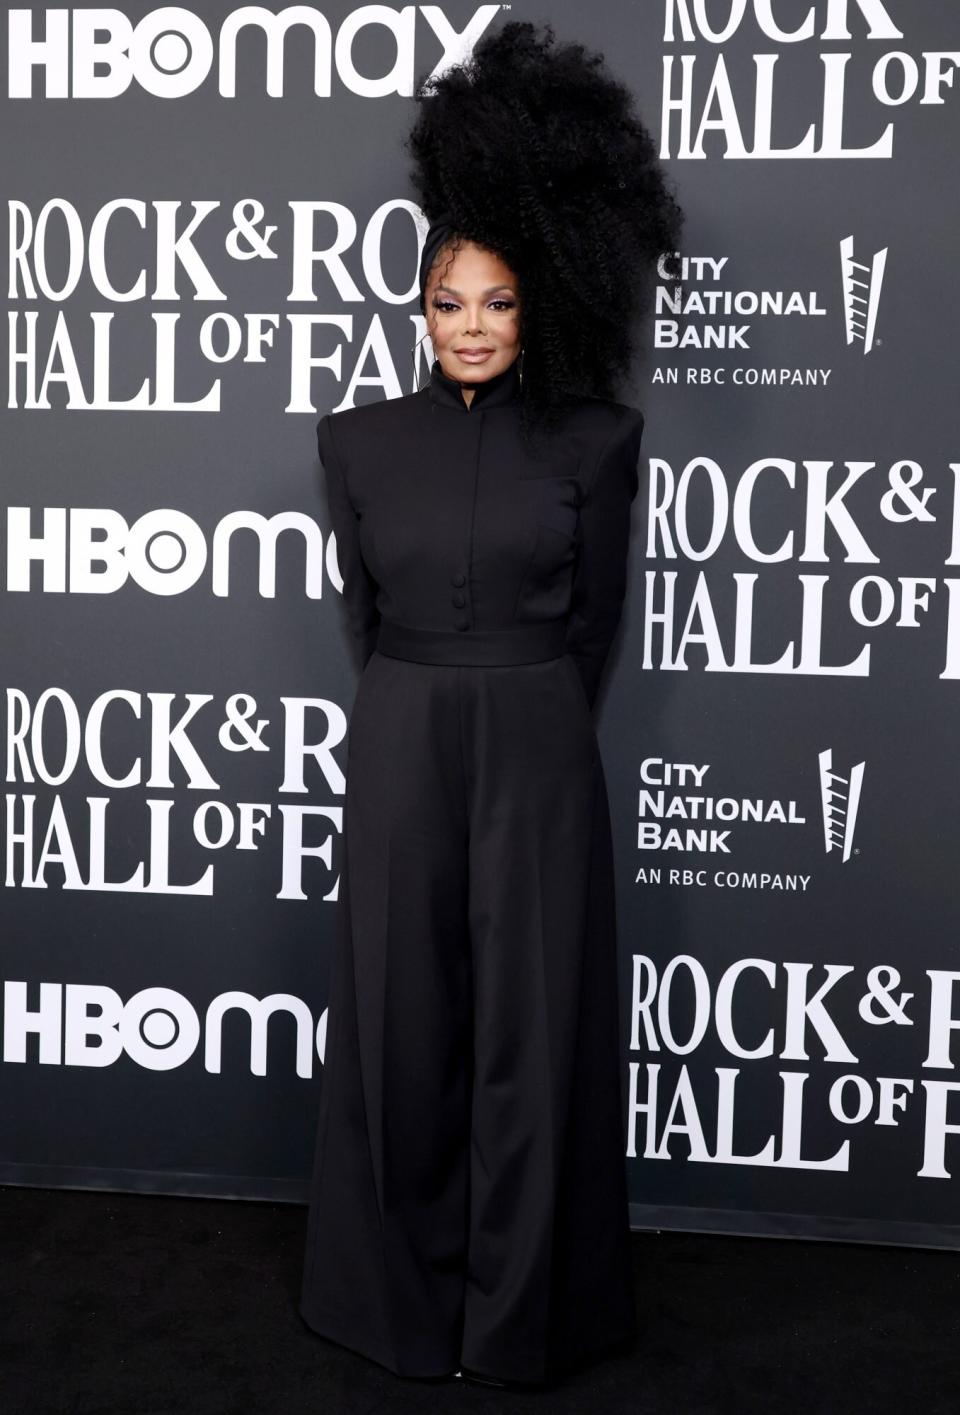 LOS ANGELES, CALIFORNIA - NOVEMBER 05: Janet Jackson poses in the press room during the 37th Annual Rock & Roll Hall of Fame Induction Ceremony at Microsoft Theater on November 05, 2022 in Los Angeles, California. (Photo by Emma McIntyre/Getty Images for The Rock and Roll Hall of Fame)